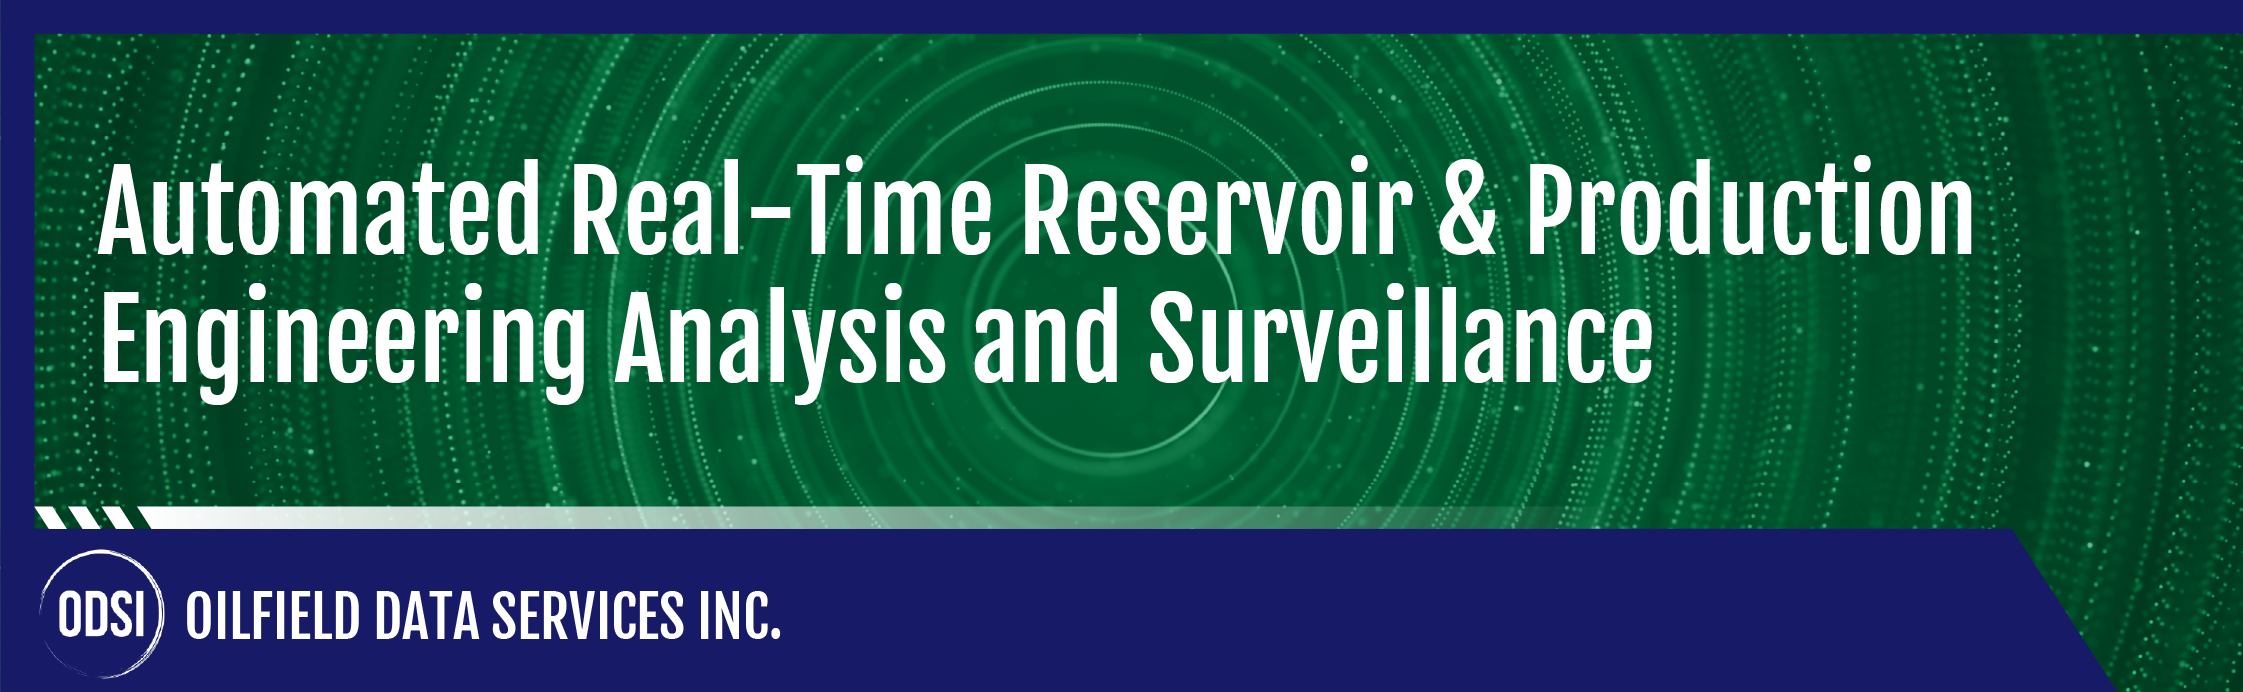 Automated Real-Time Reservoir & Production Engineering Analysis and Surveillance